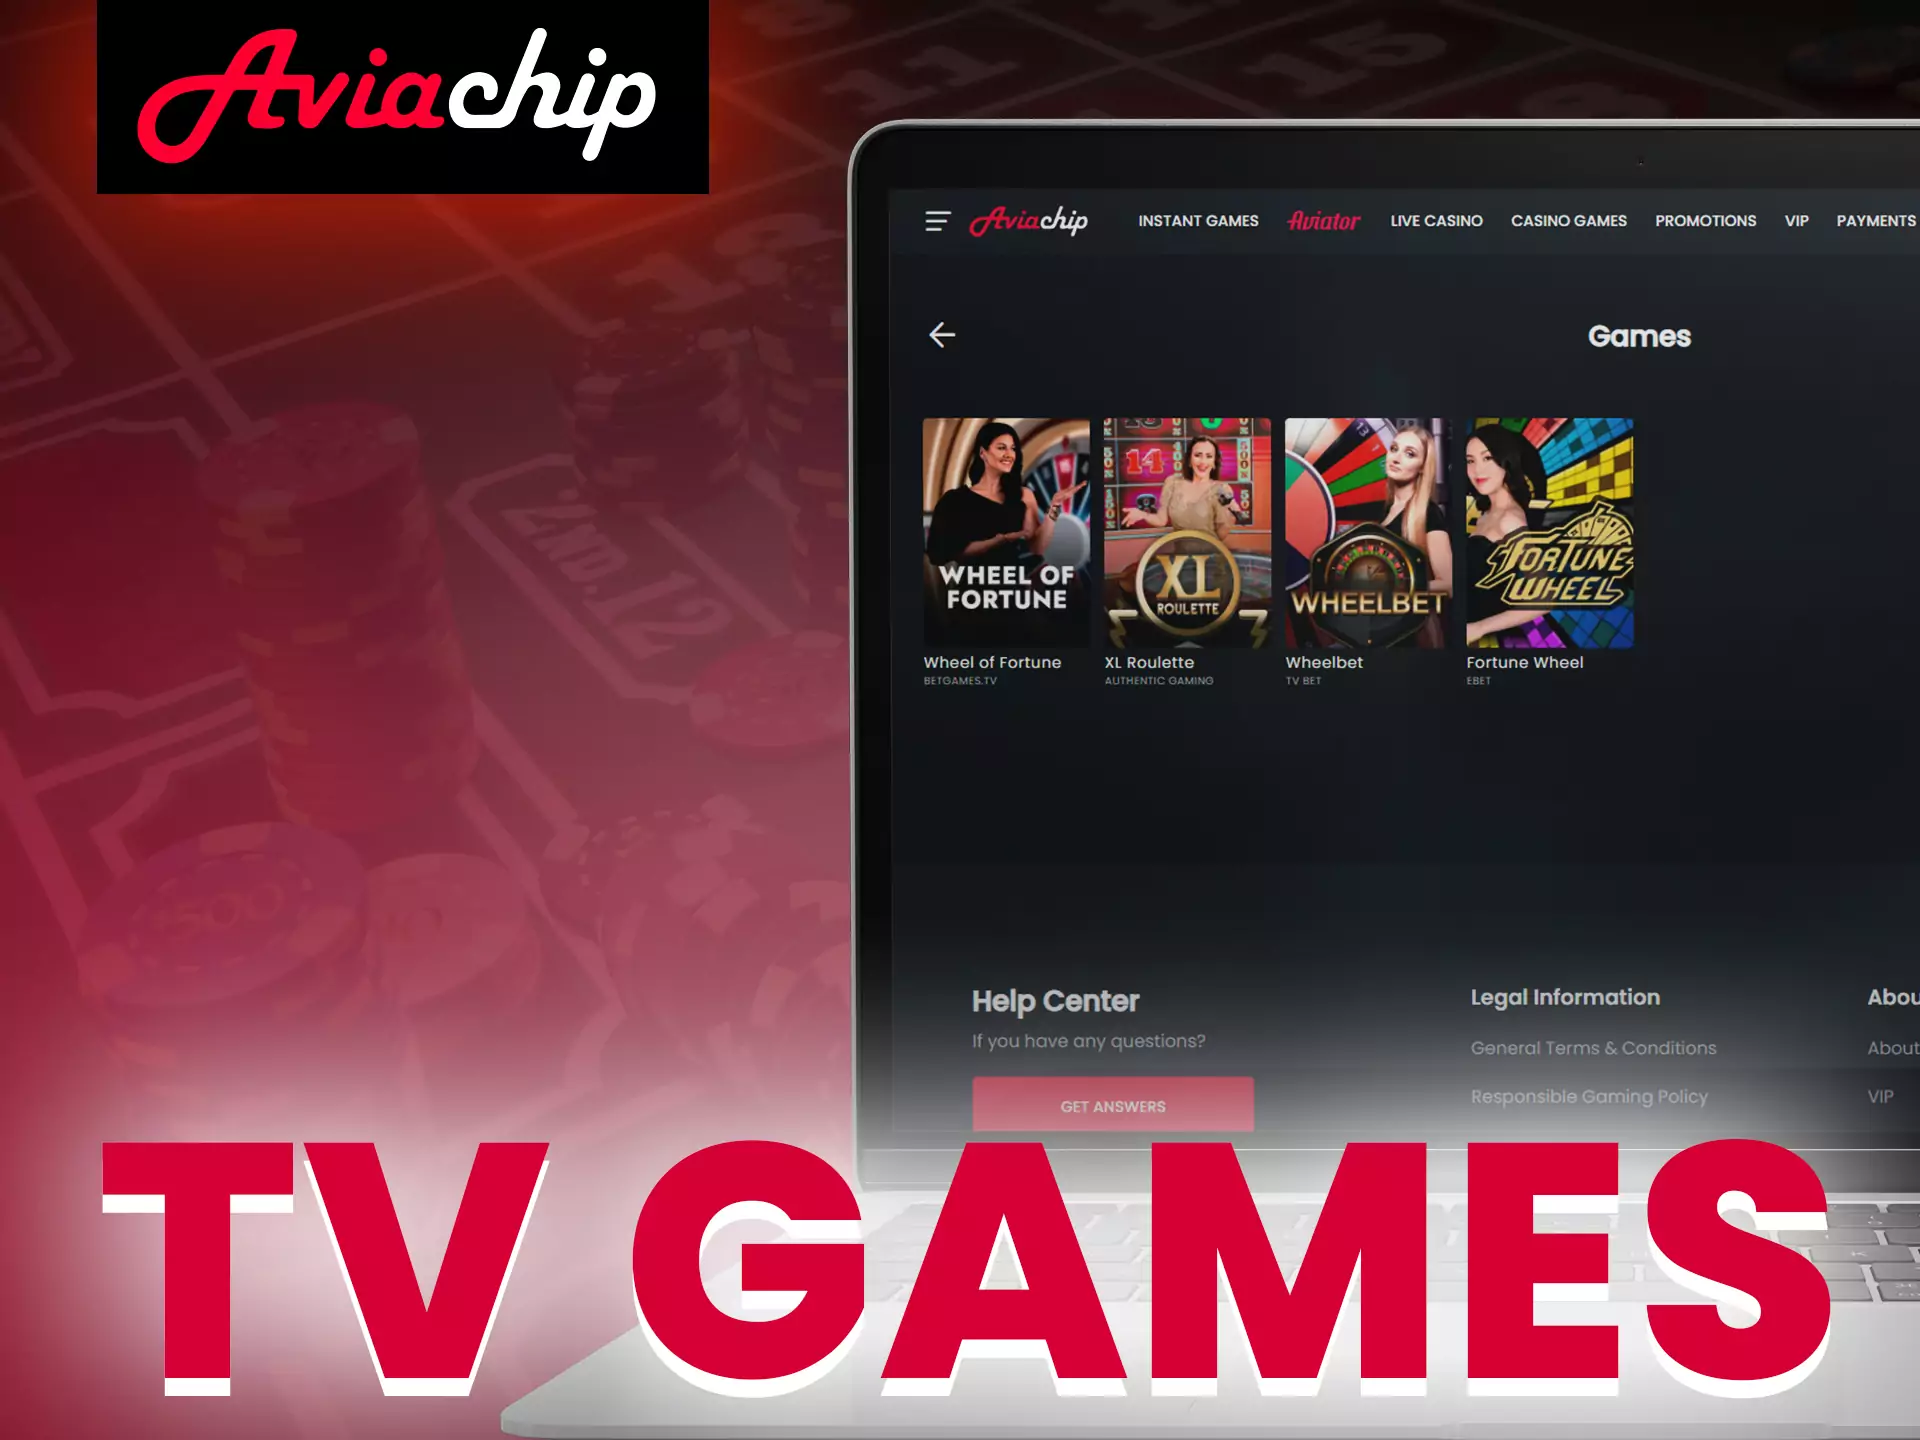 With Aviachip, play exciting TV games.